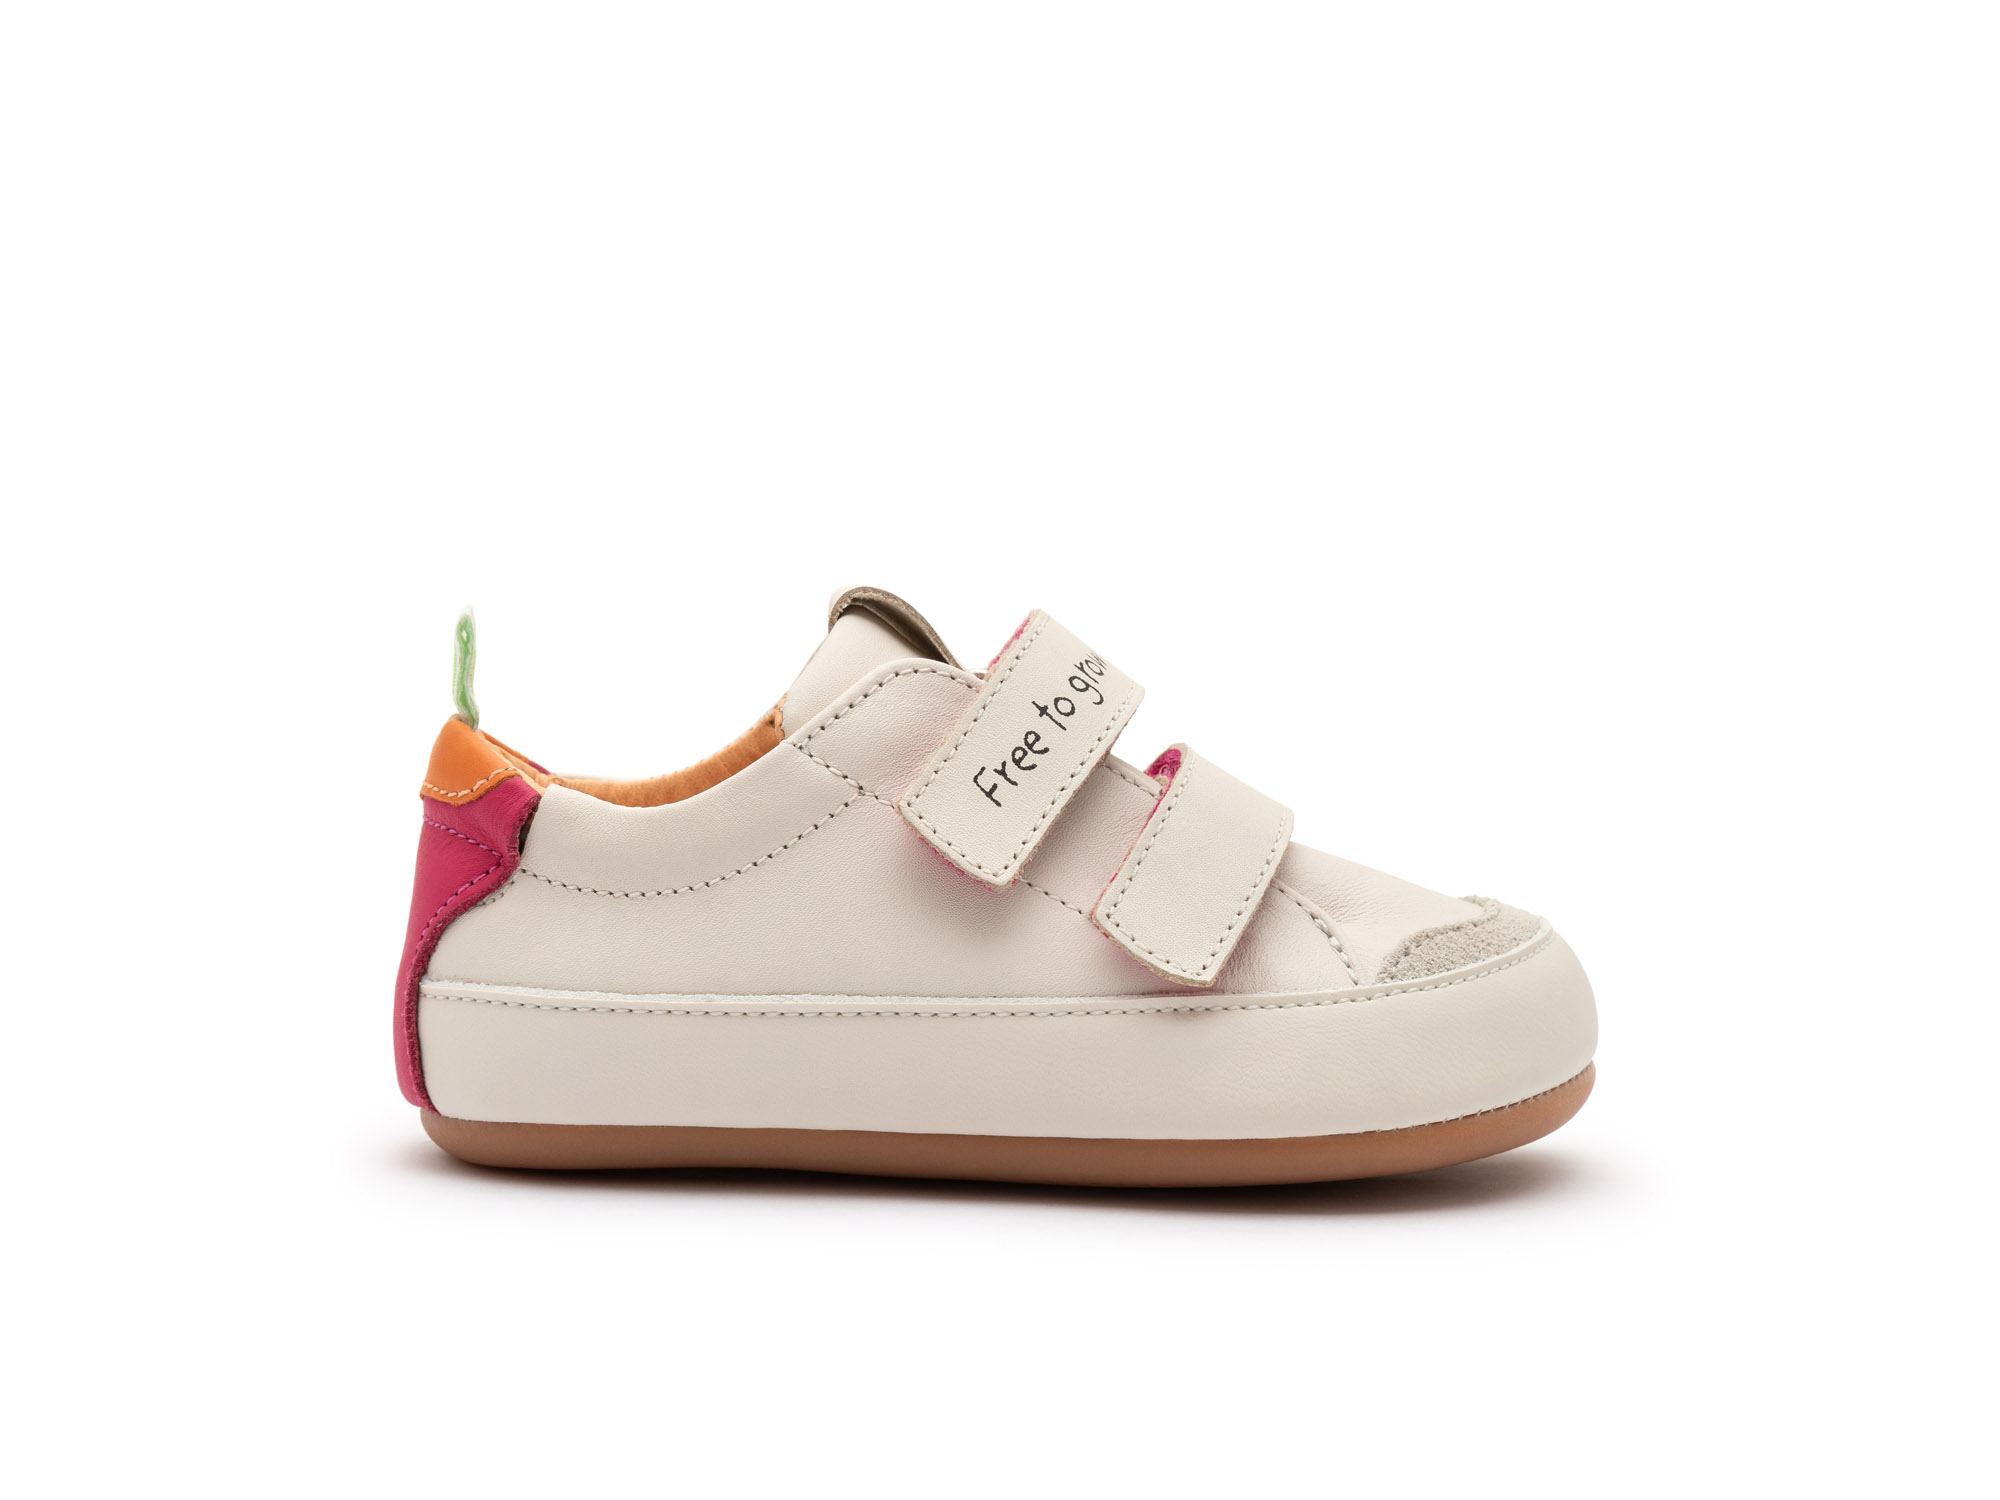 UP & GO Sneakers for Girls Bossy Play | Tip Toey Joey - Australia - 4